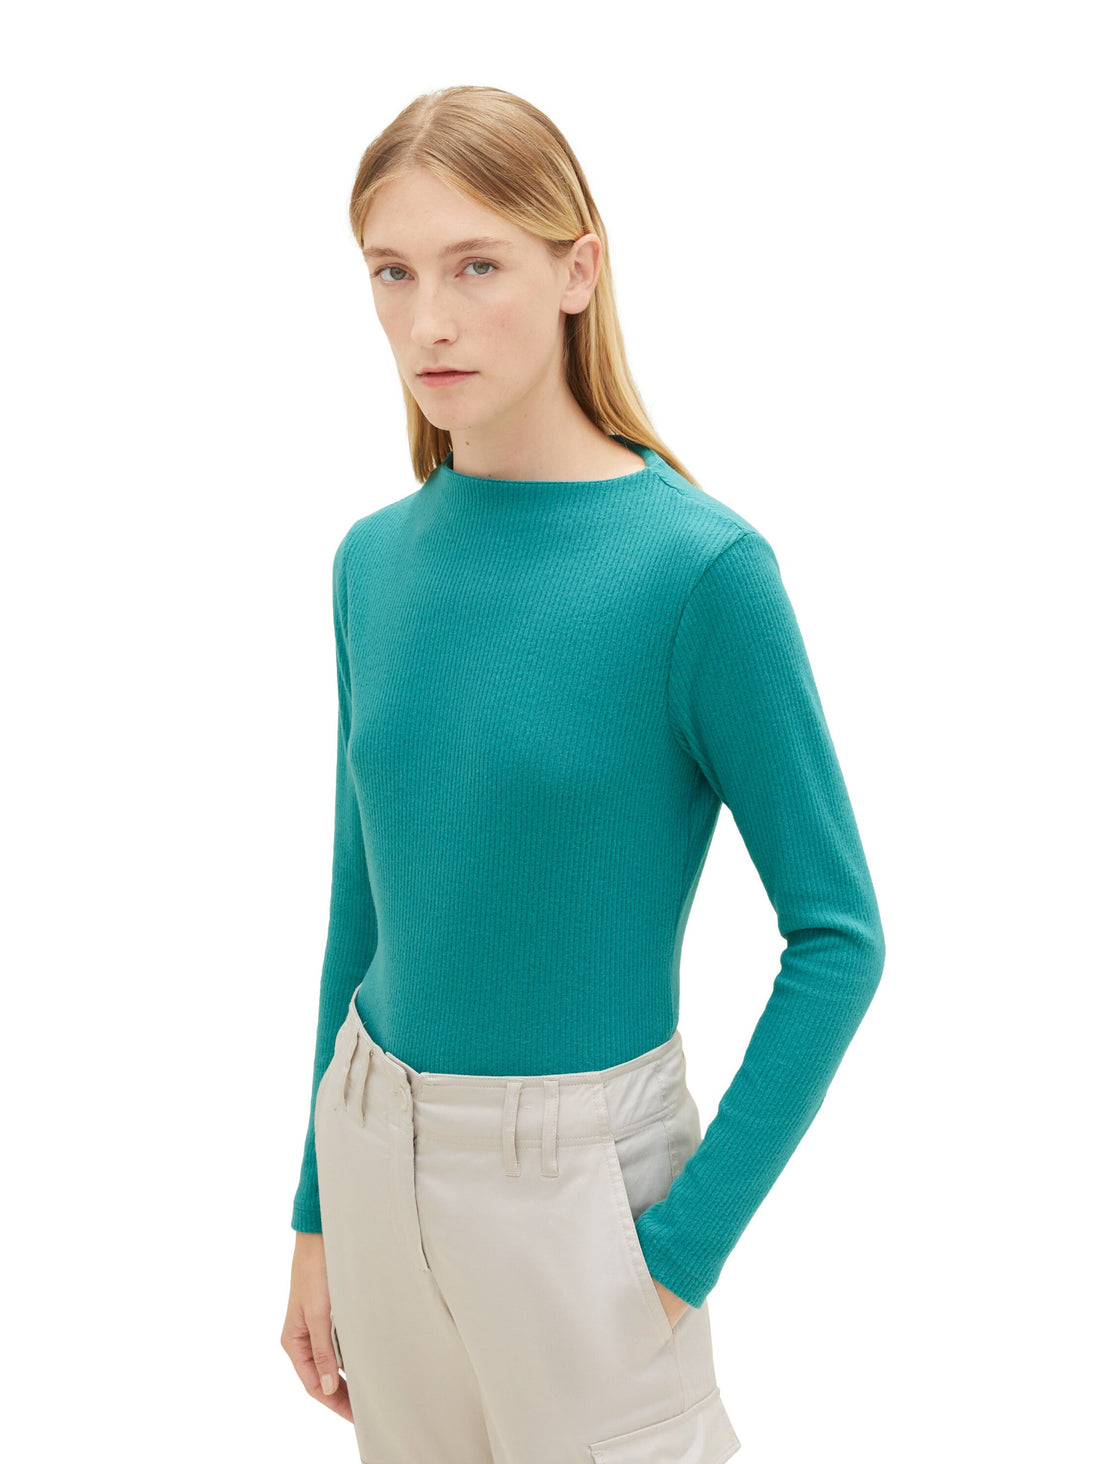 Long Sleeve T Shirt With Round Neckline_1038165_21178_02